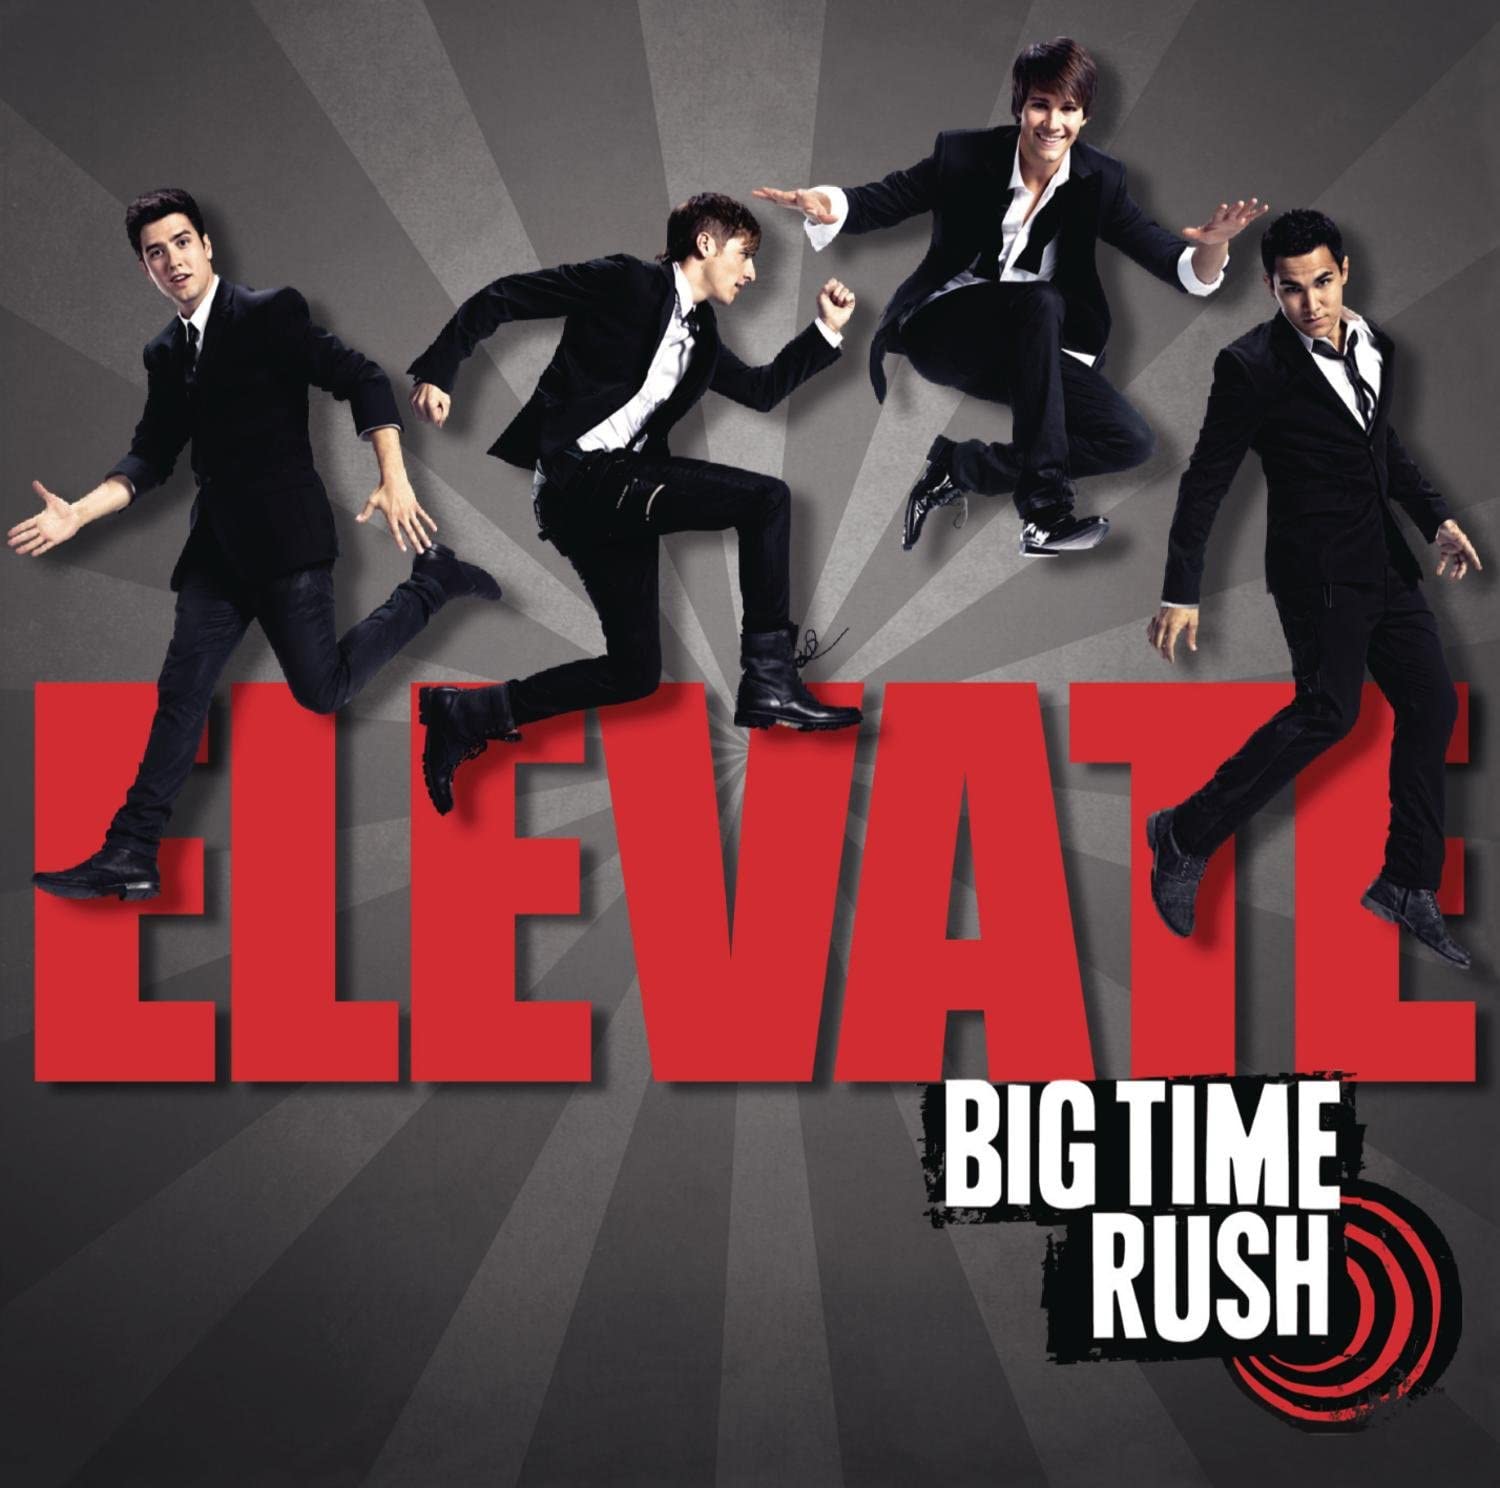 Big Time Rush — Cover Girl cover artwork